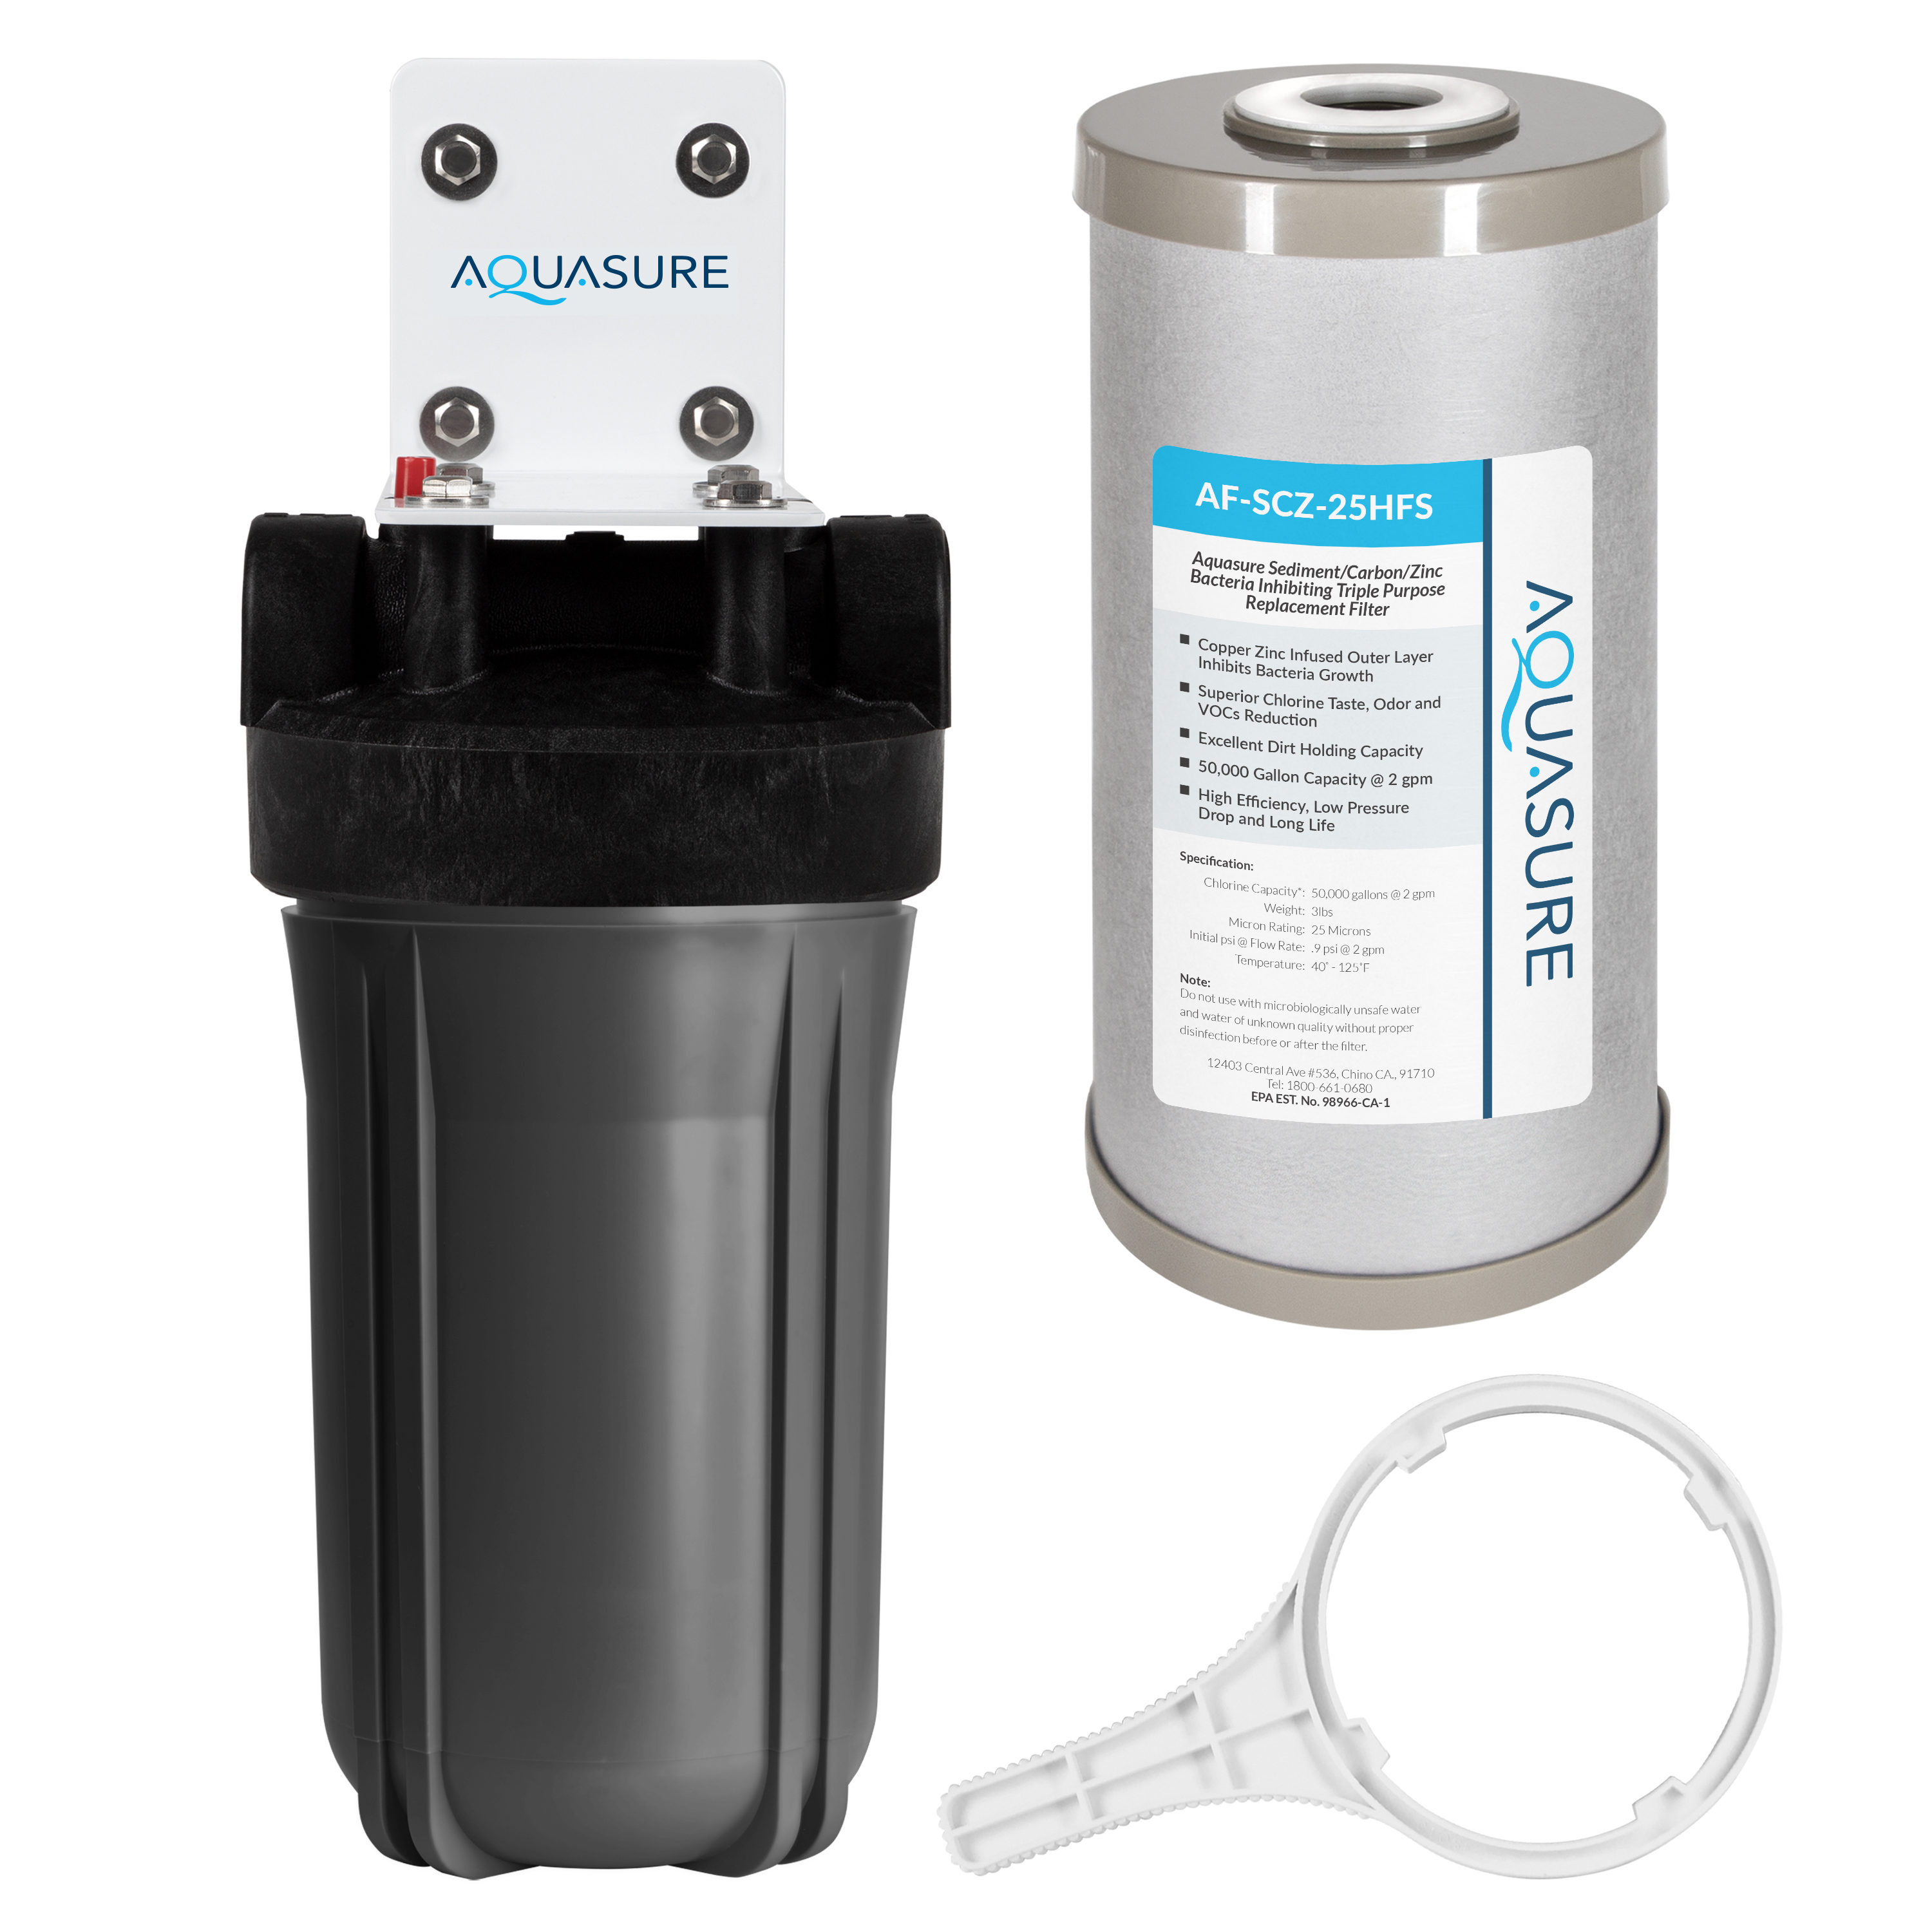 Whole House Filtration Systems at